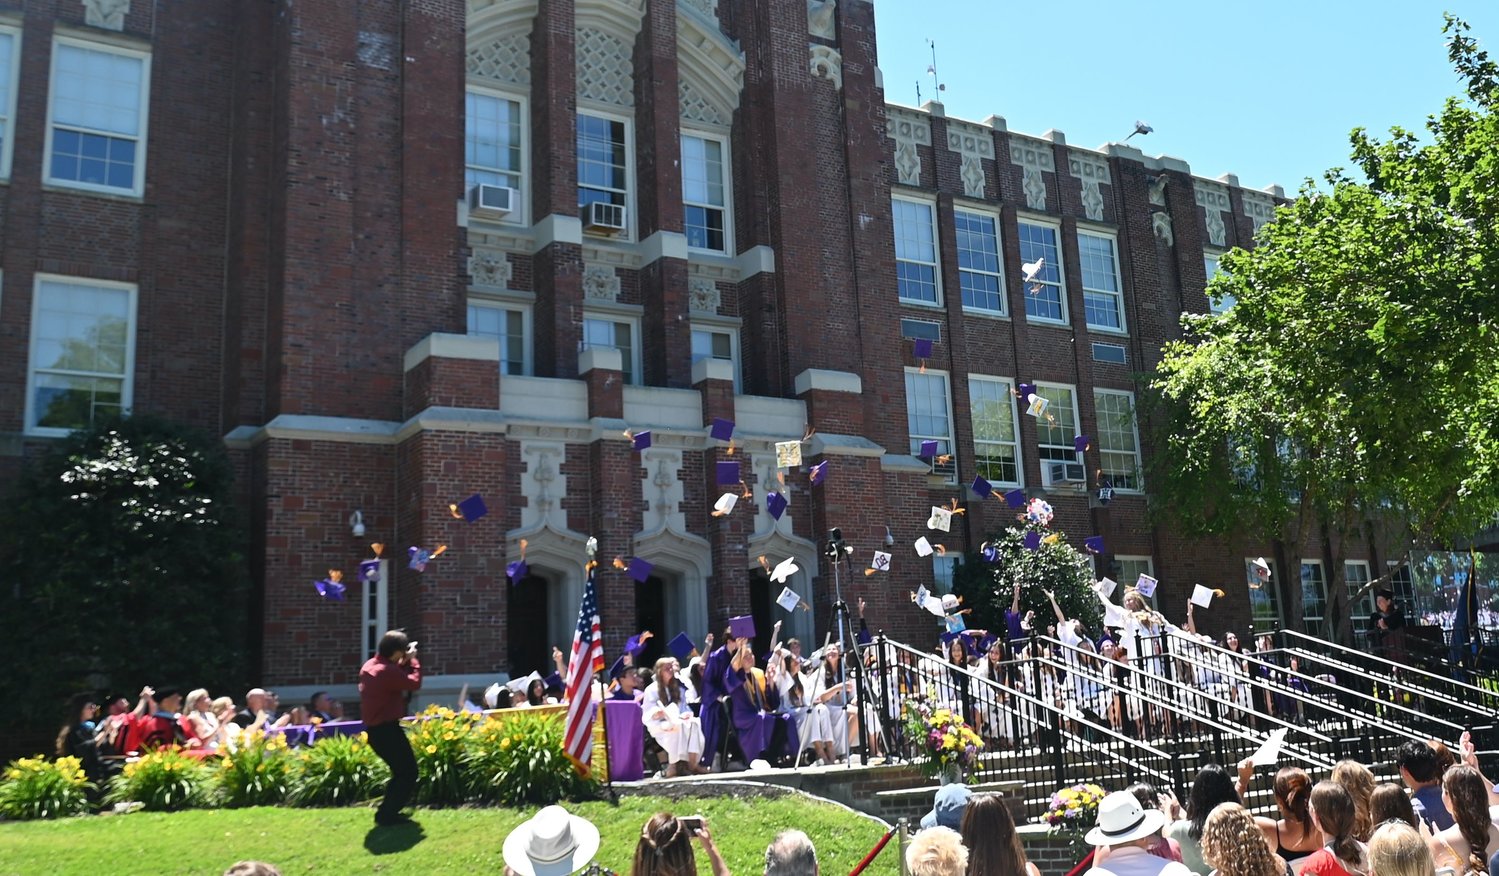 The Oyster Bay High School Class of 2022 tossed their caps at the conclusion of the commencement ceremony